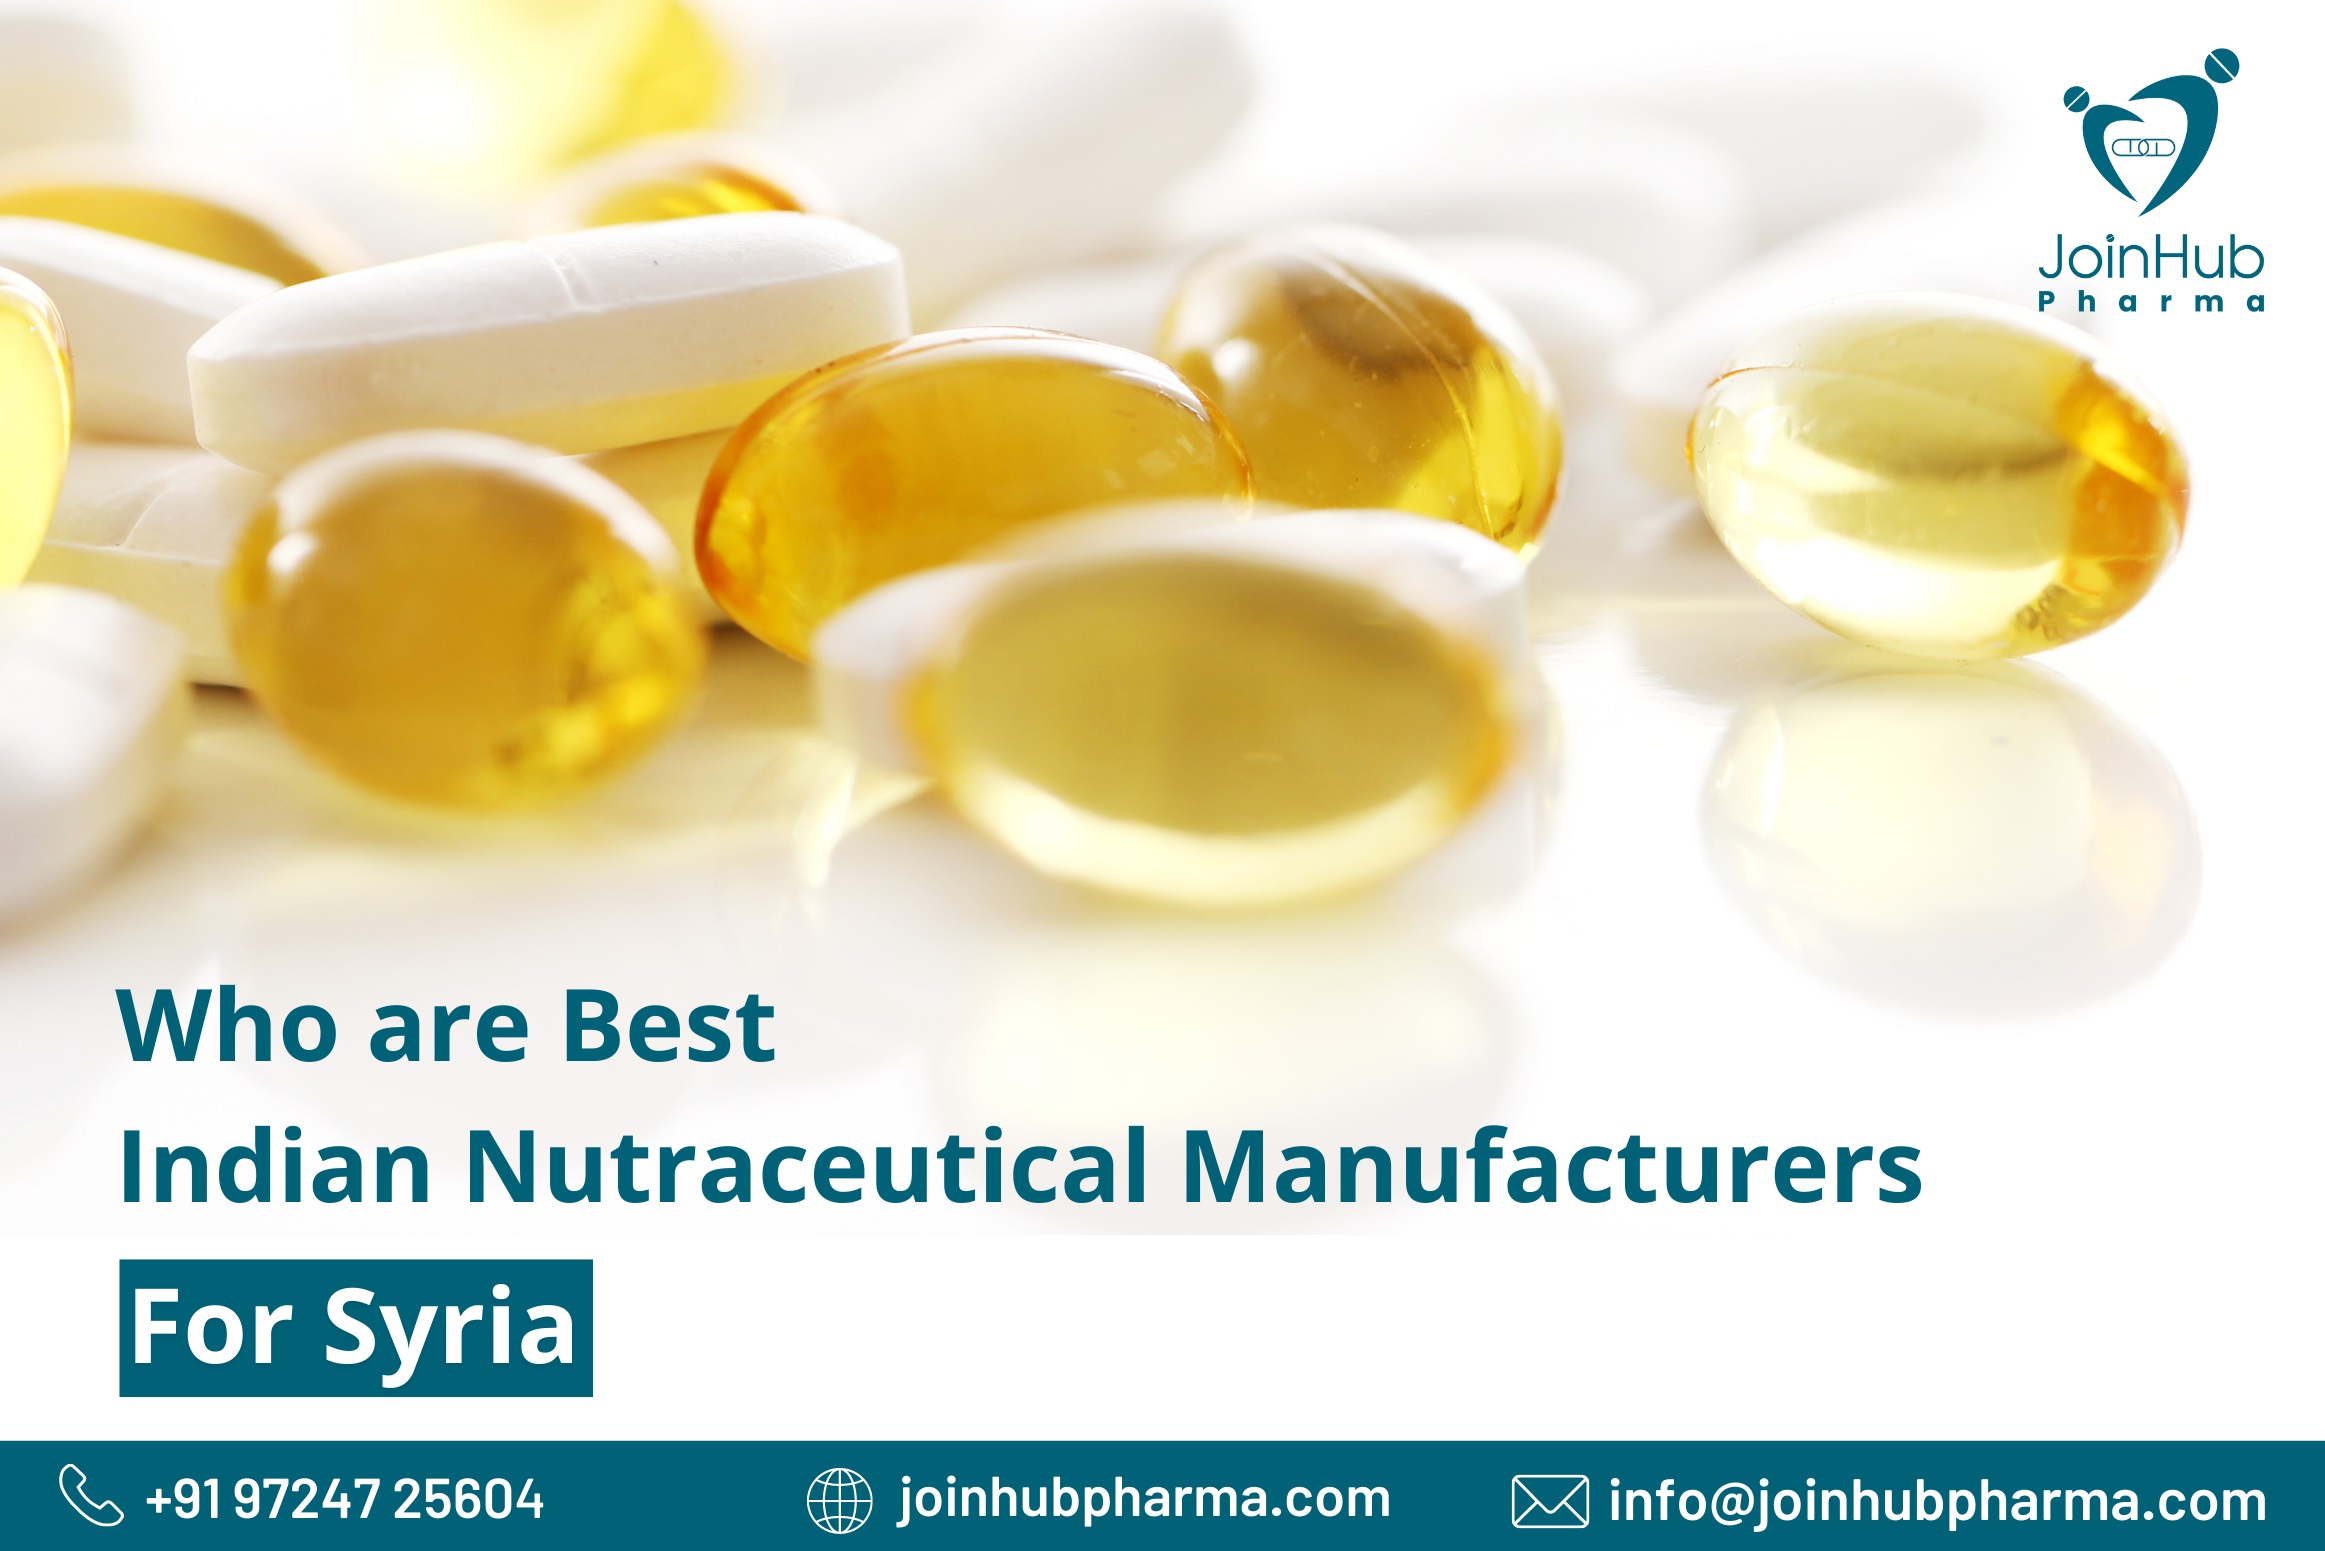 Who are the Best Indian Nutraceutical manufacturers For Syria?